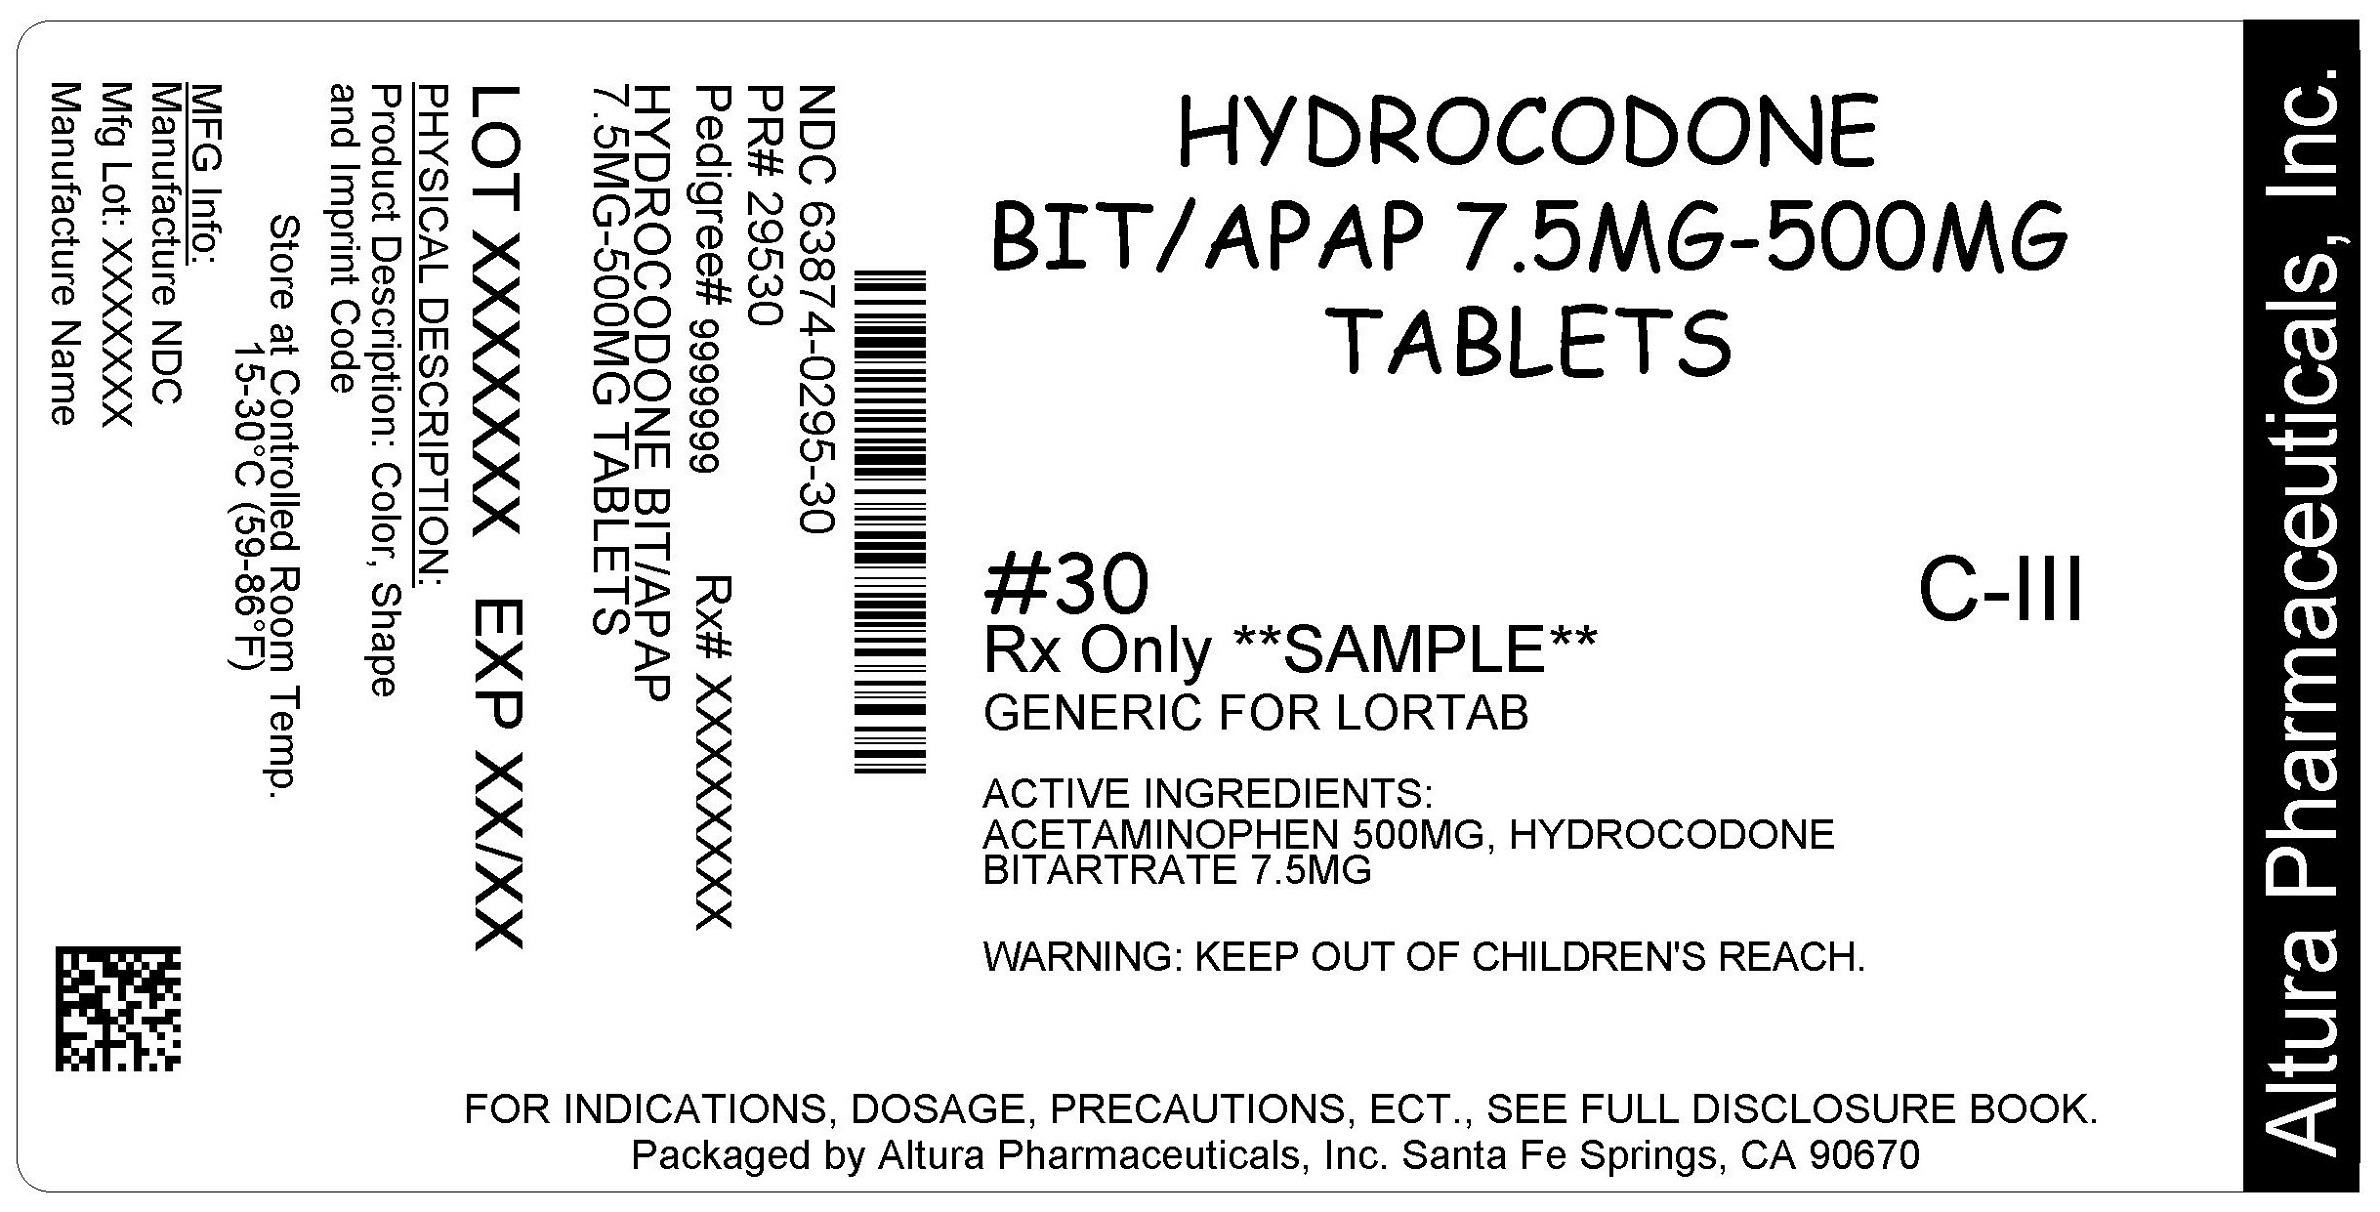 This is an image of the label for 7.5 mg/500 mg Hydrocodone Bitartrate and Acetaminophen Tablets.